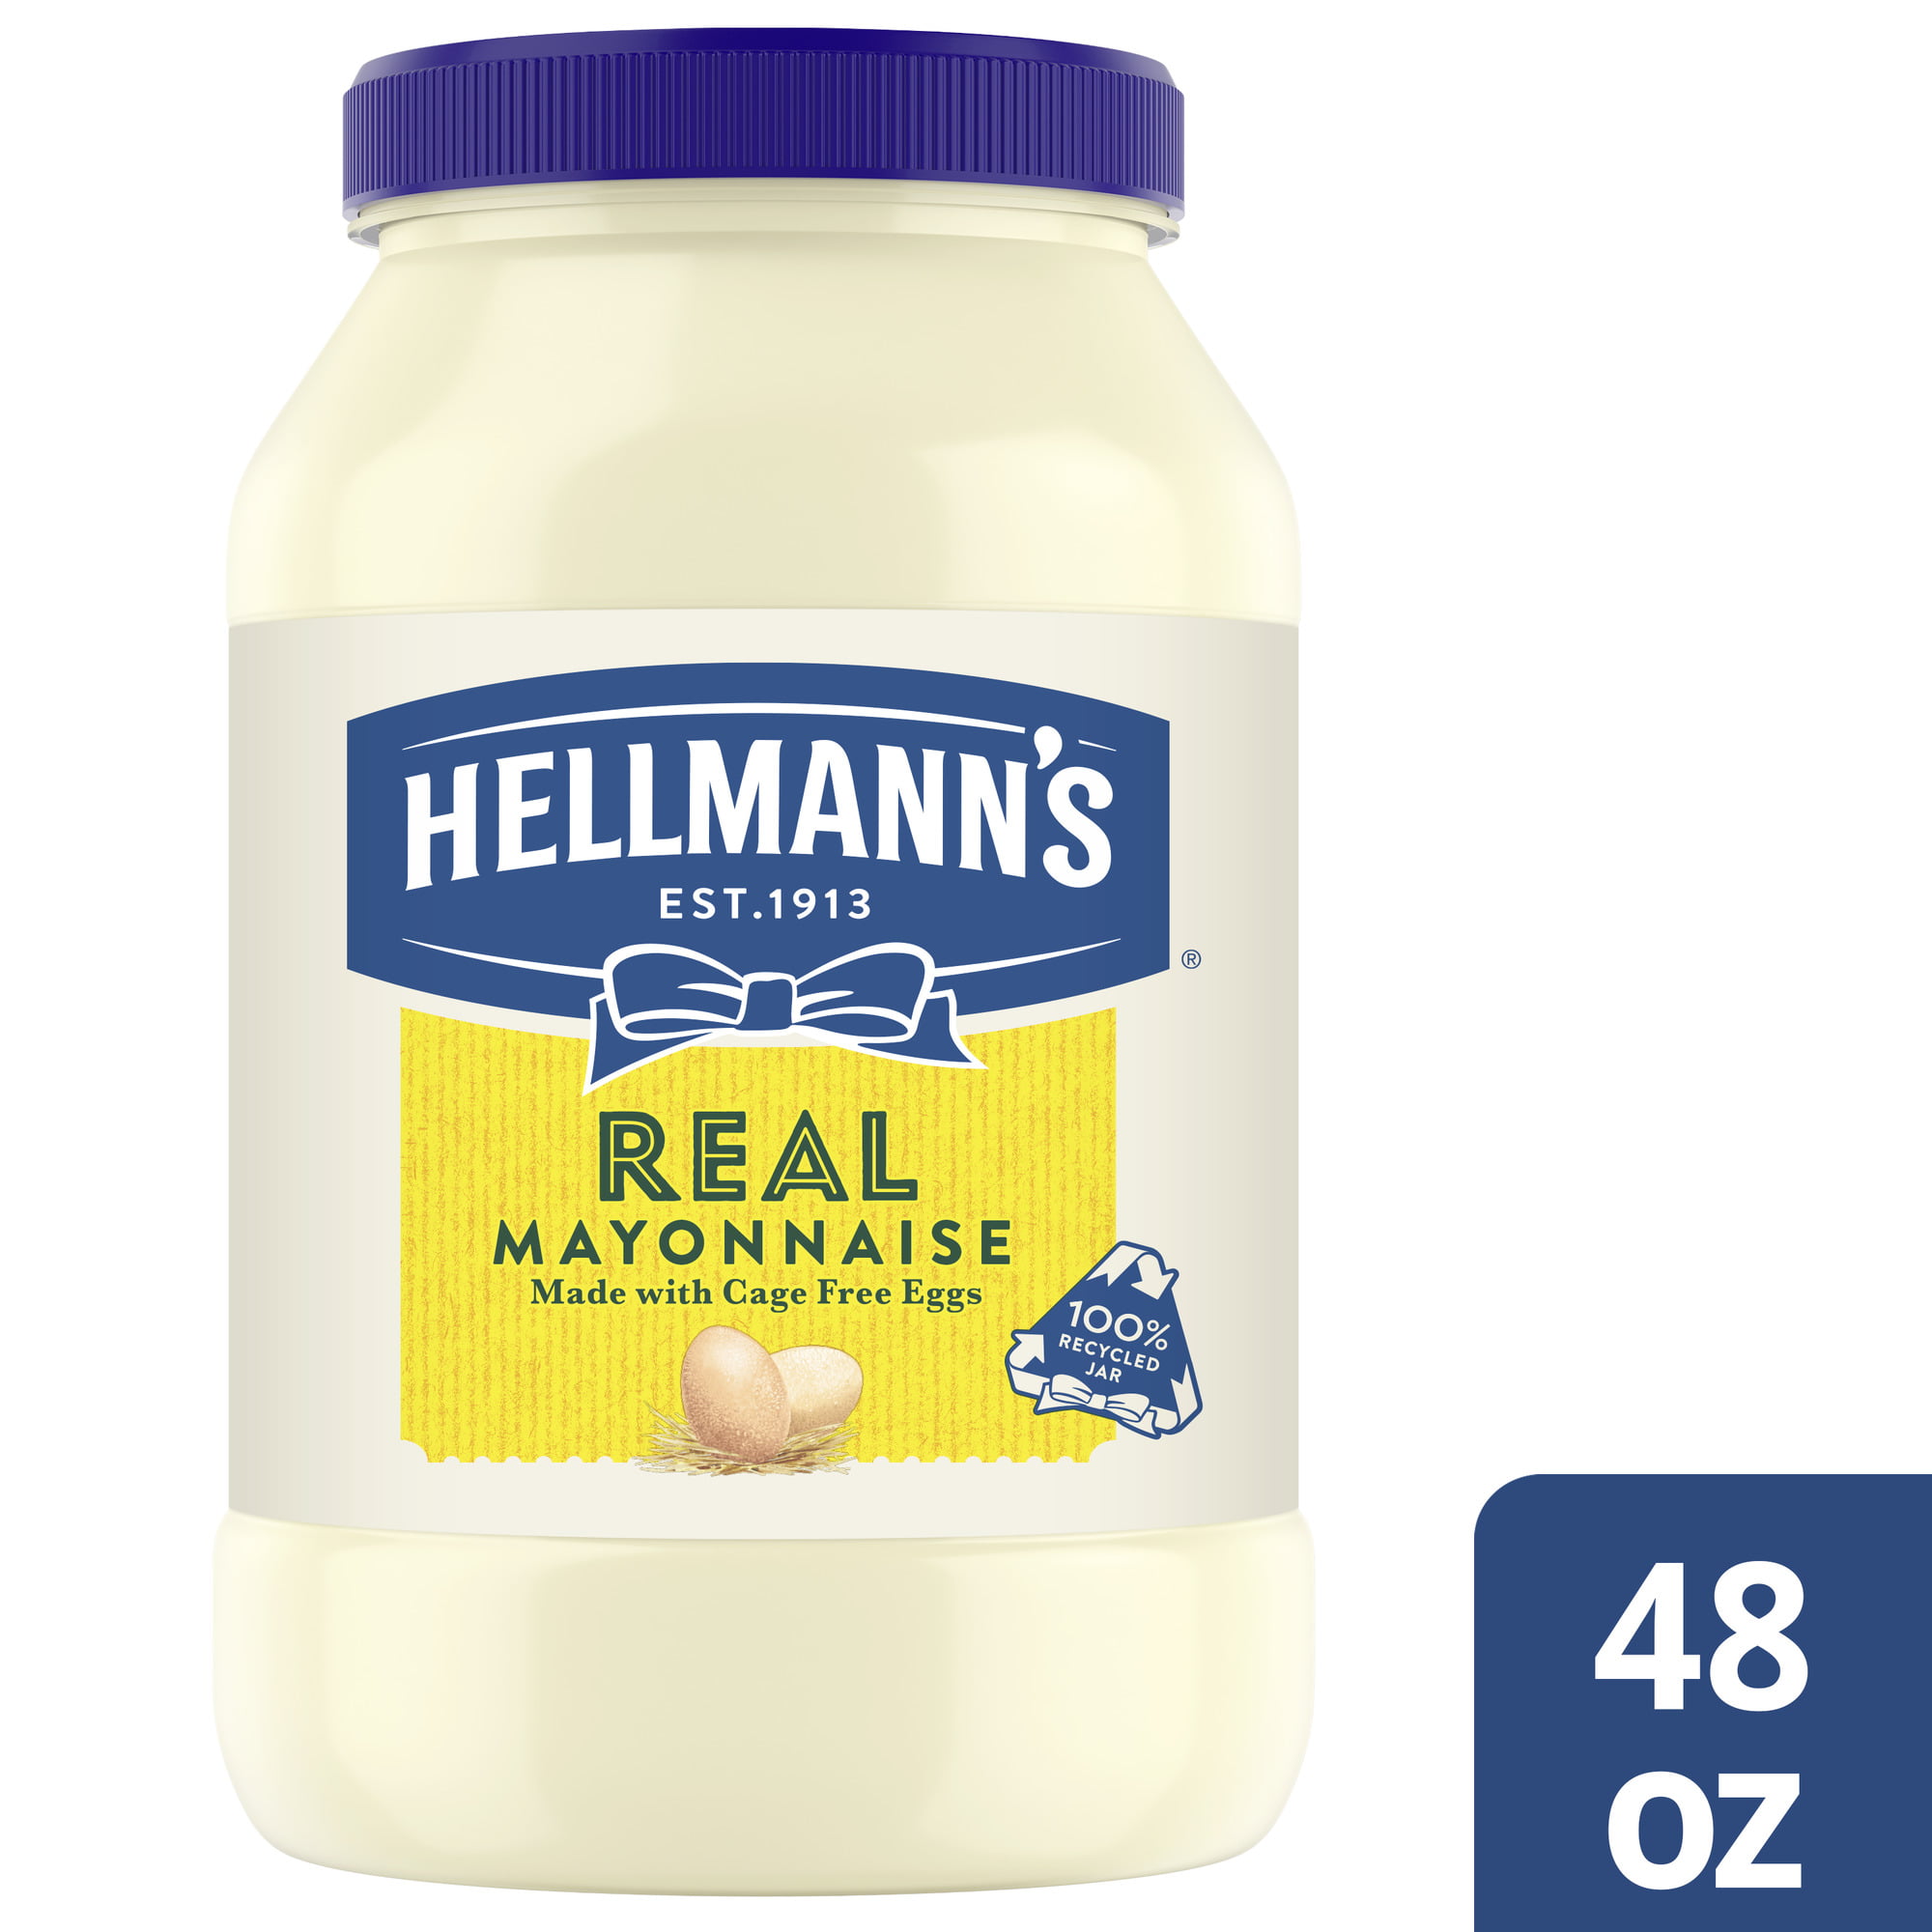 Hellmann's Made with Cage Free Eggs Real Mayonnaise, 48 fl oz Jar - image 1 of 14